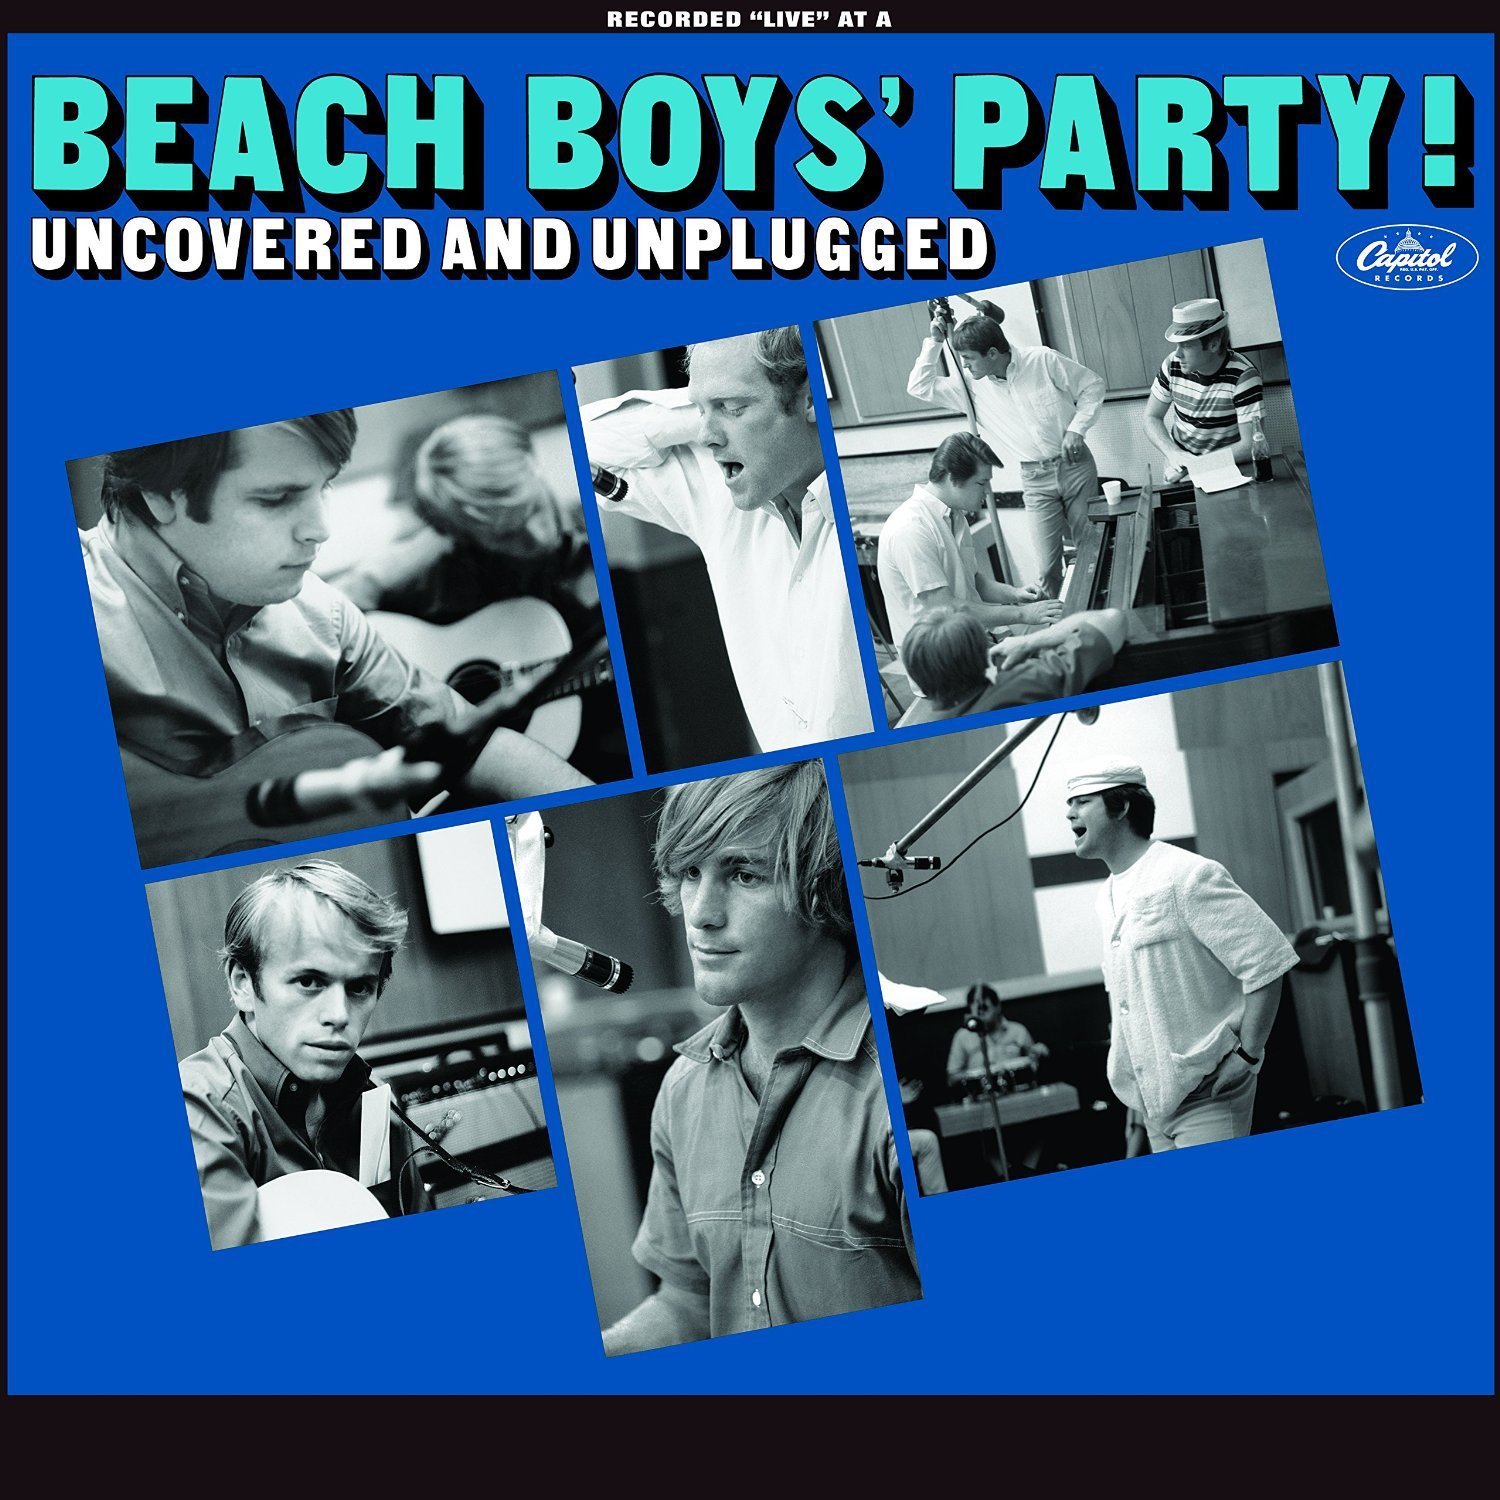 The Beach Boys-The Beach Boys Party Uncovered And Unplugged-24-88-WEB-FLAC-2015-OBZEN Download